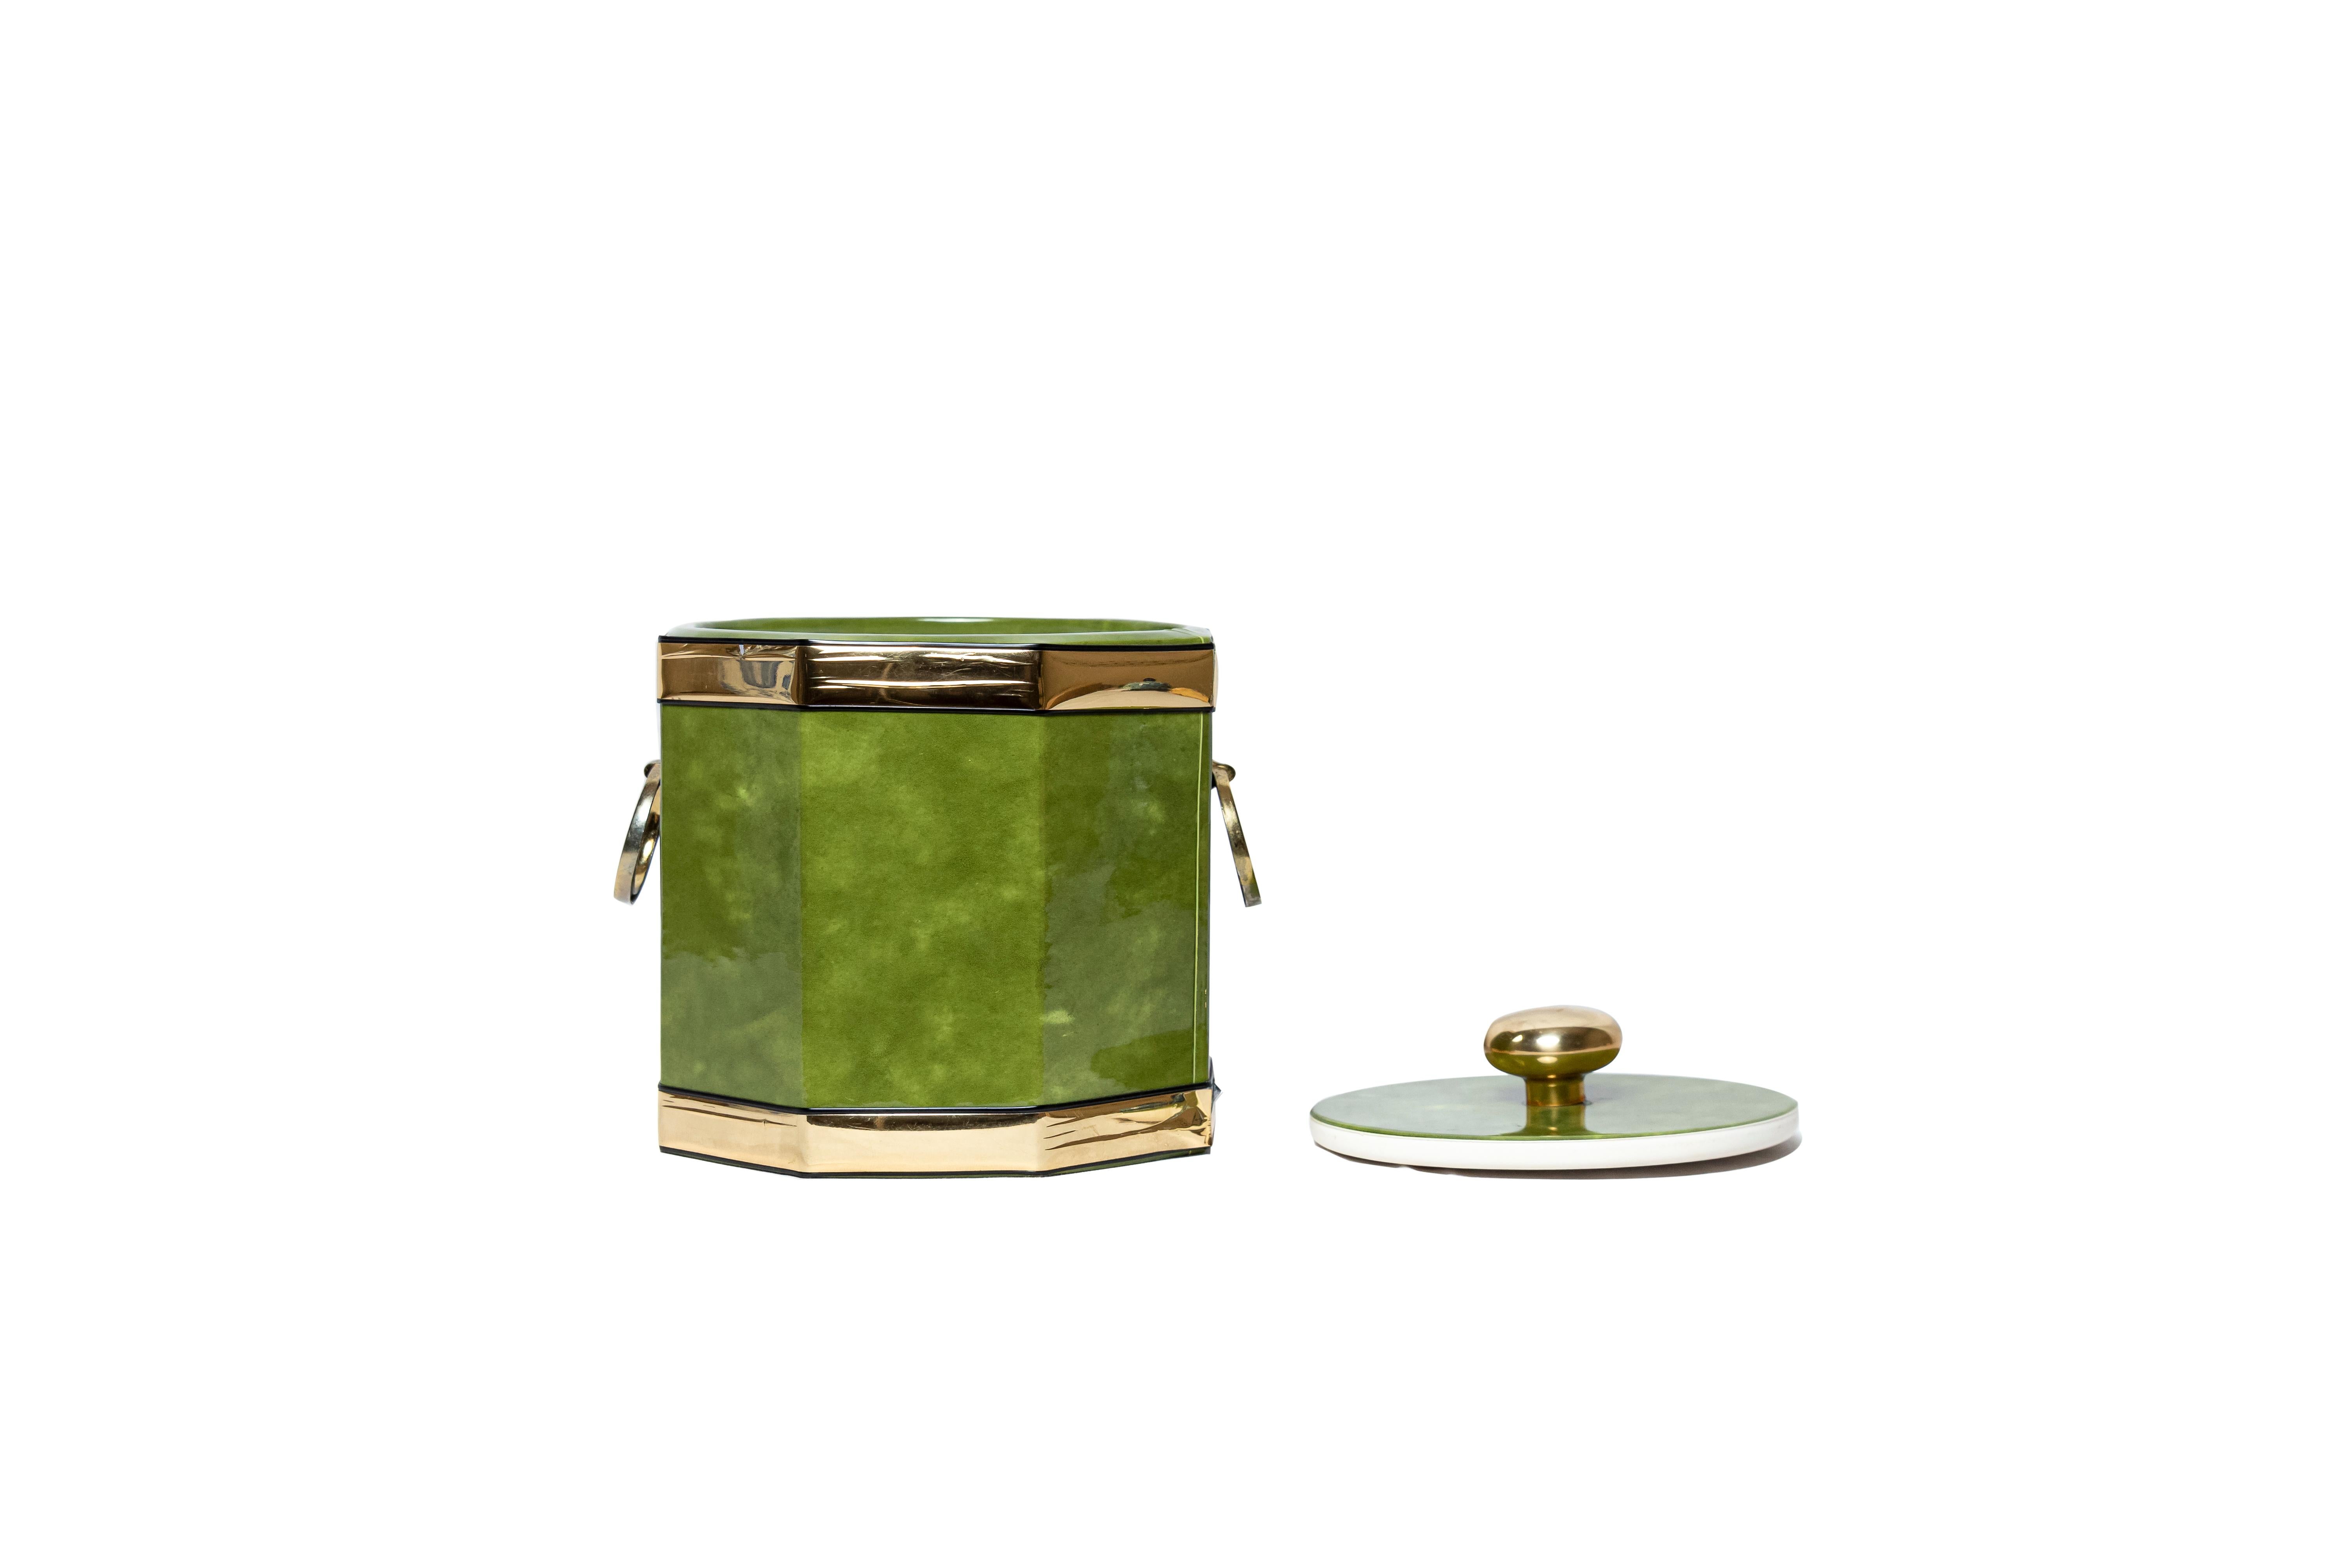 Italian 20th century 70s Aldo Tura green faux goatskin ice bucket.
With faux brass rings and rim detail.